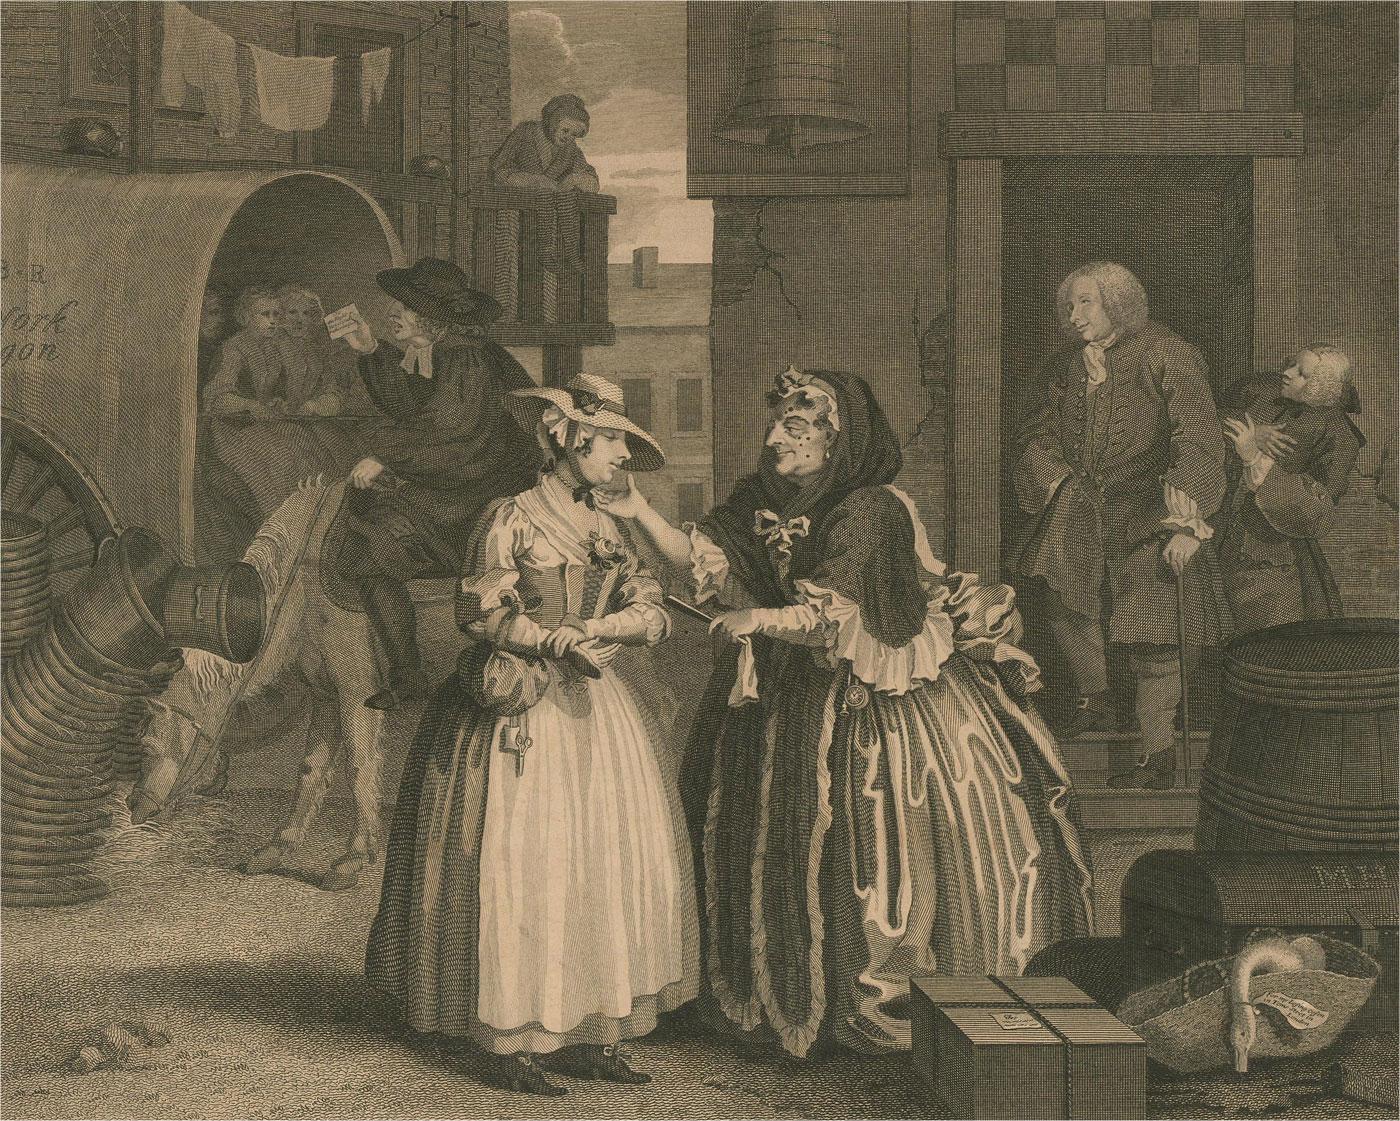 Thomas Cook after Hogarth Figurative Print - T. Cook after Hogarth - Six Early 19th Century Engravings, A Harlot's Progress